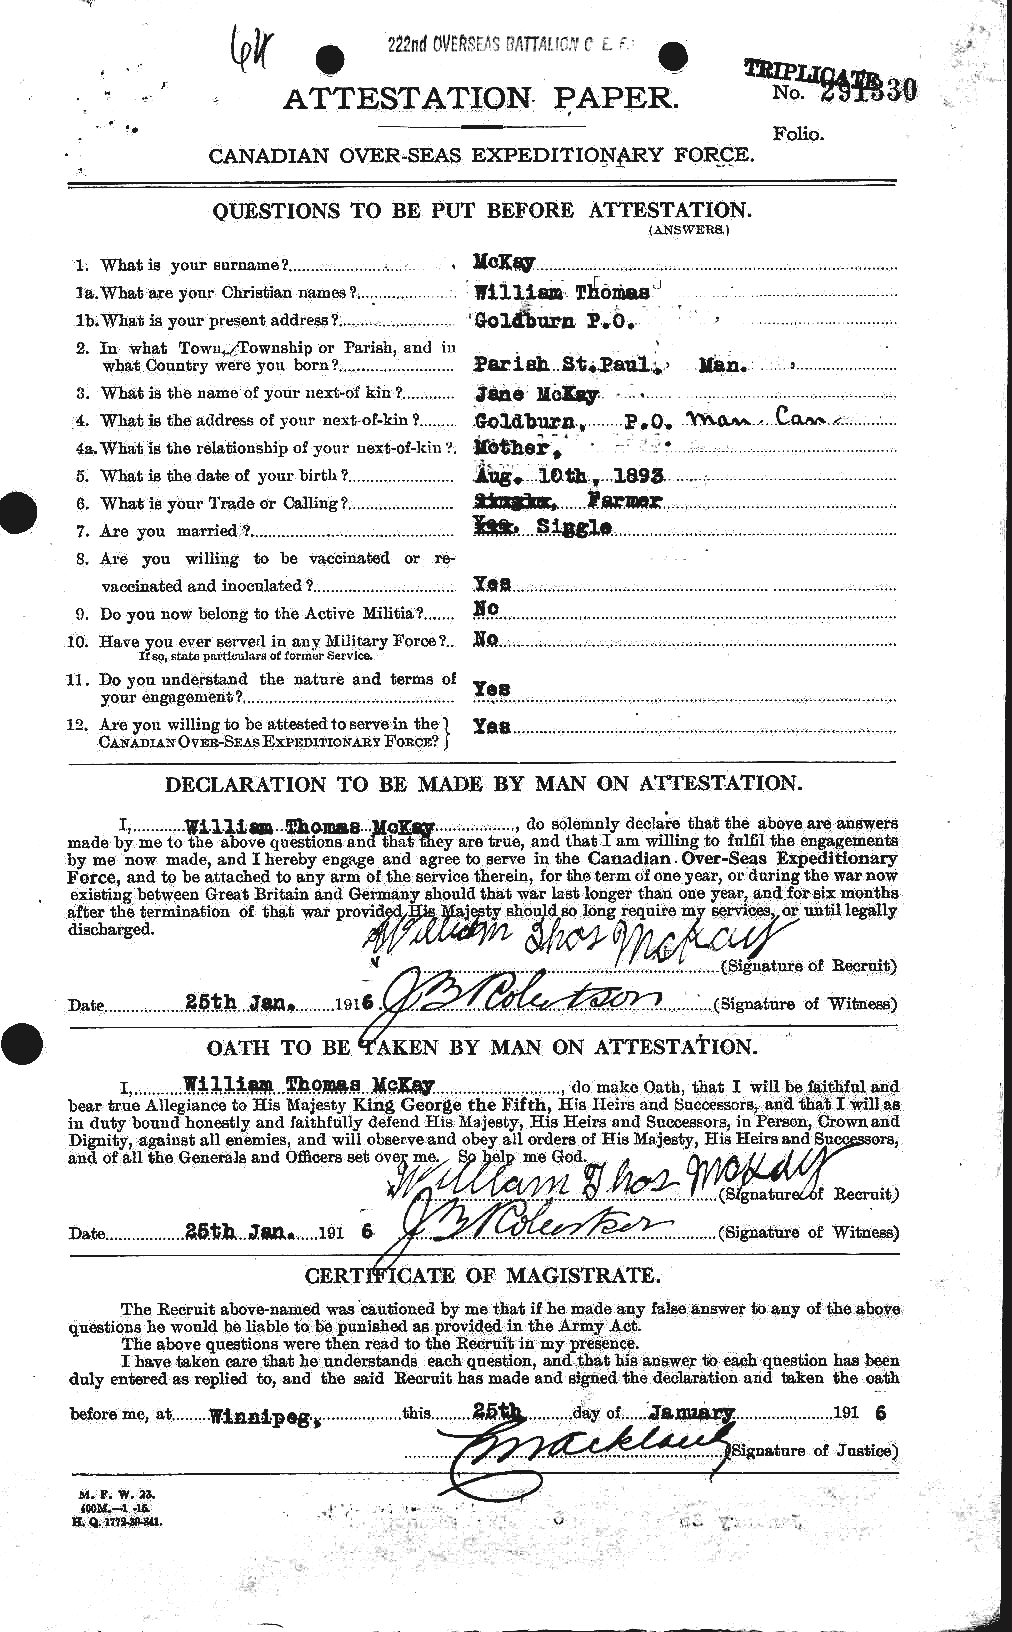 Personnel Records of the First World War - CEF 530323a